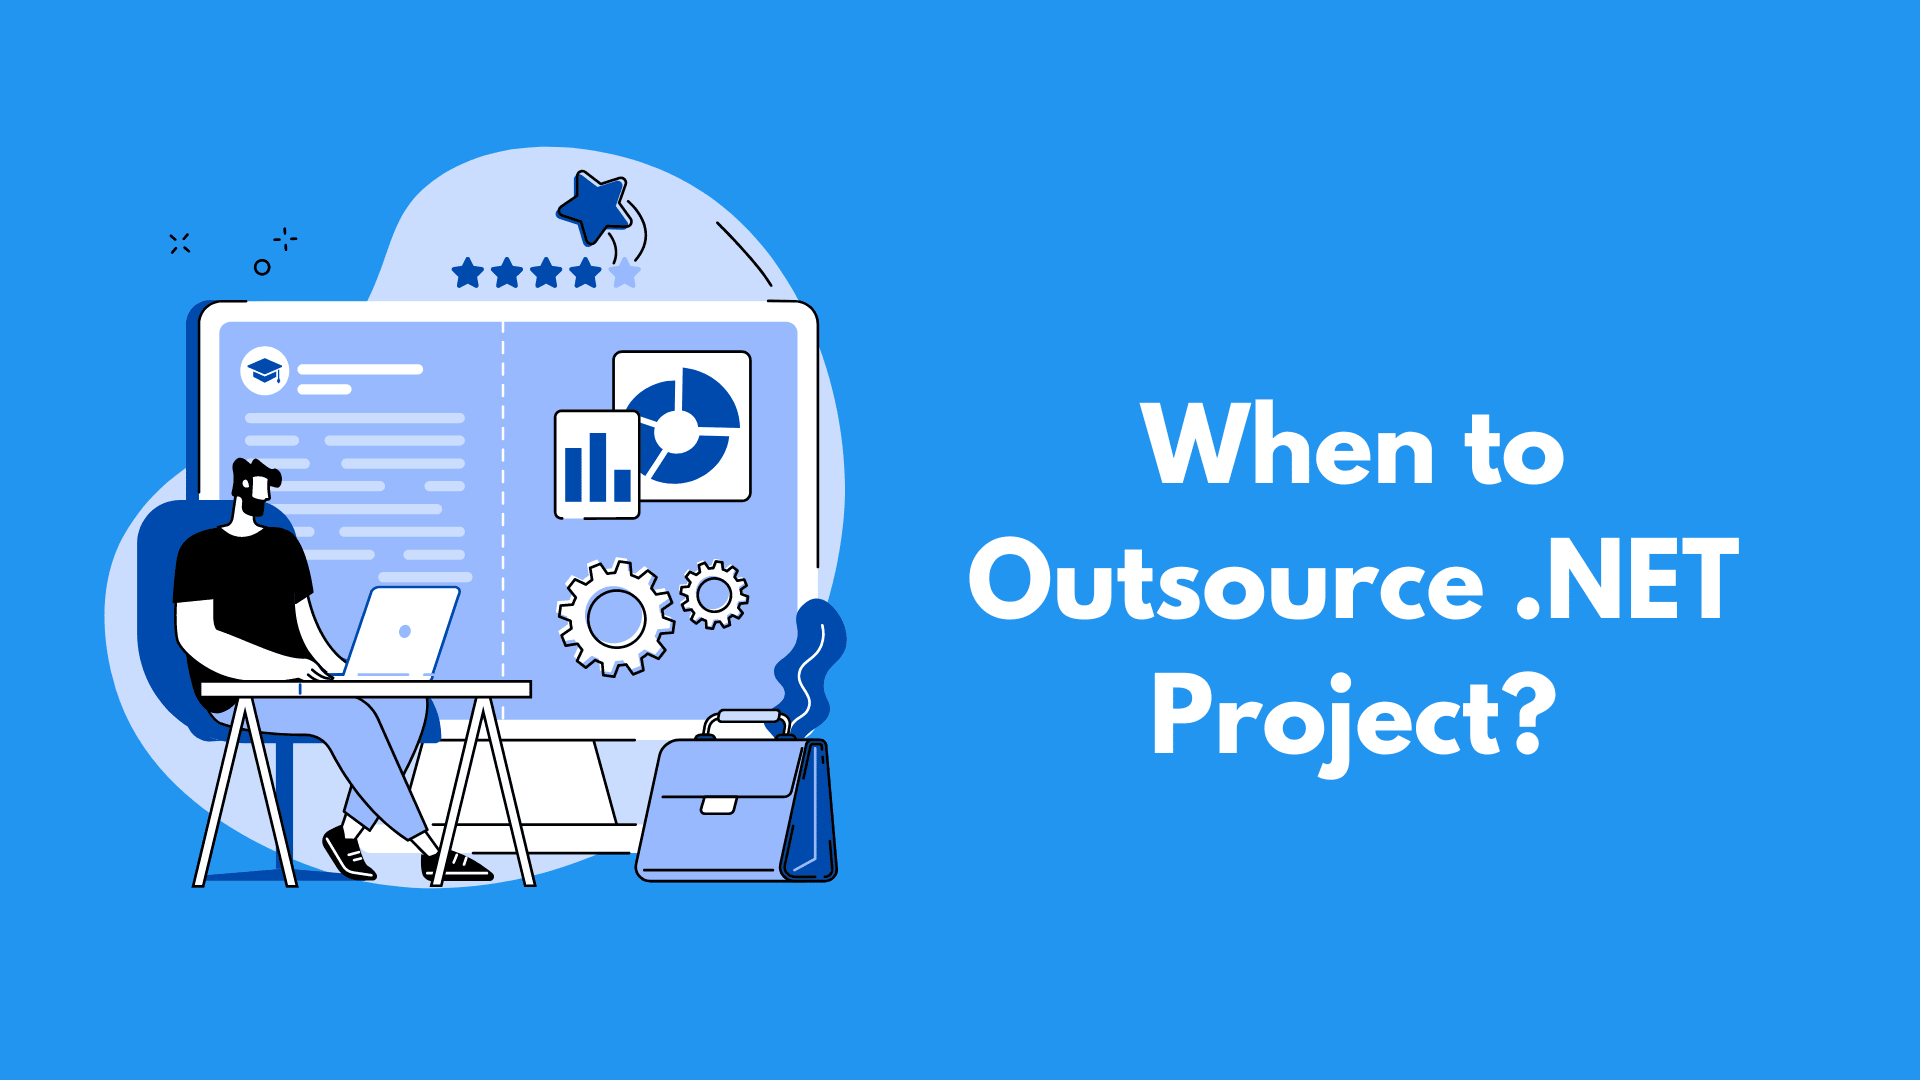 When to Outsource .NET Project?